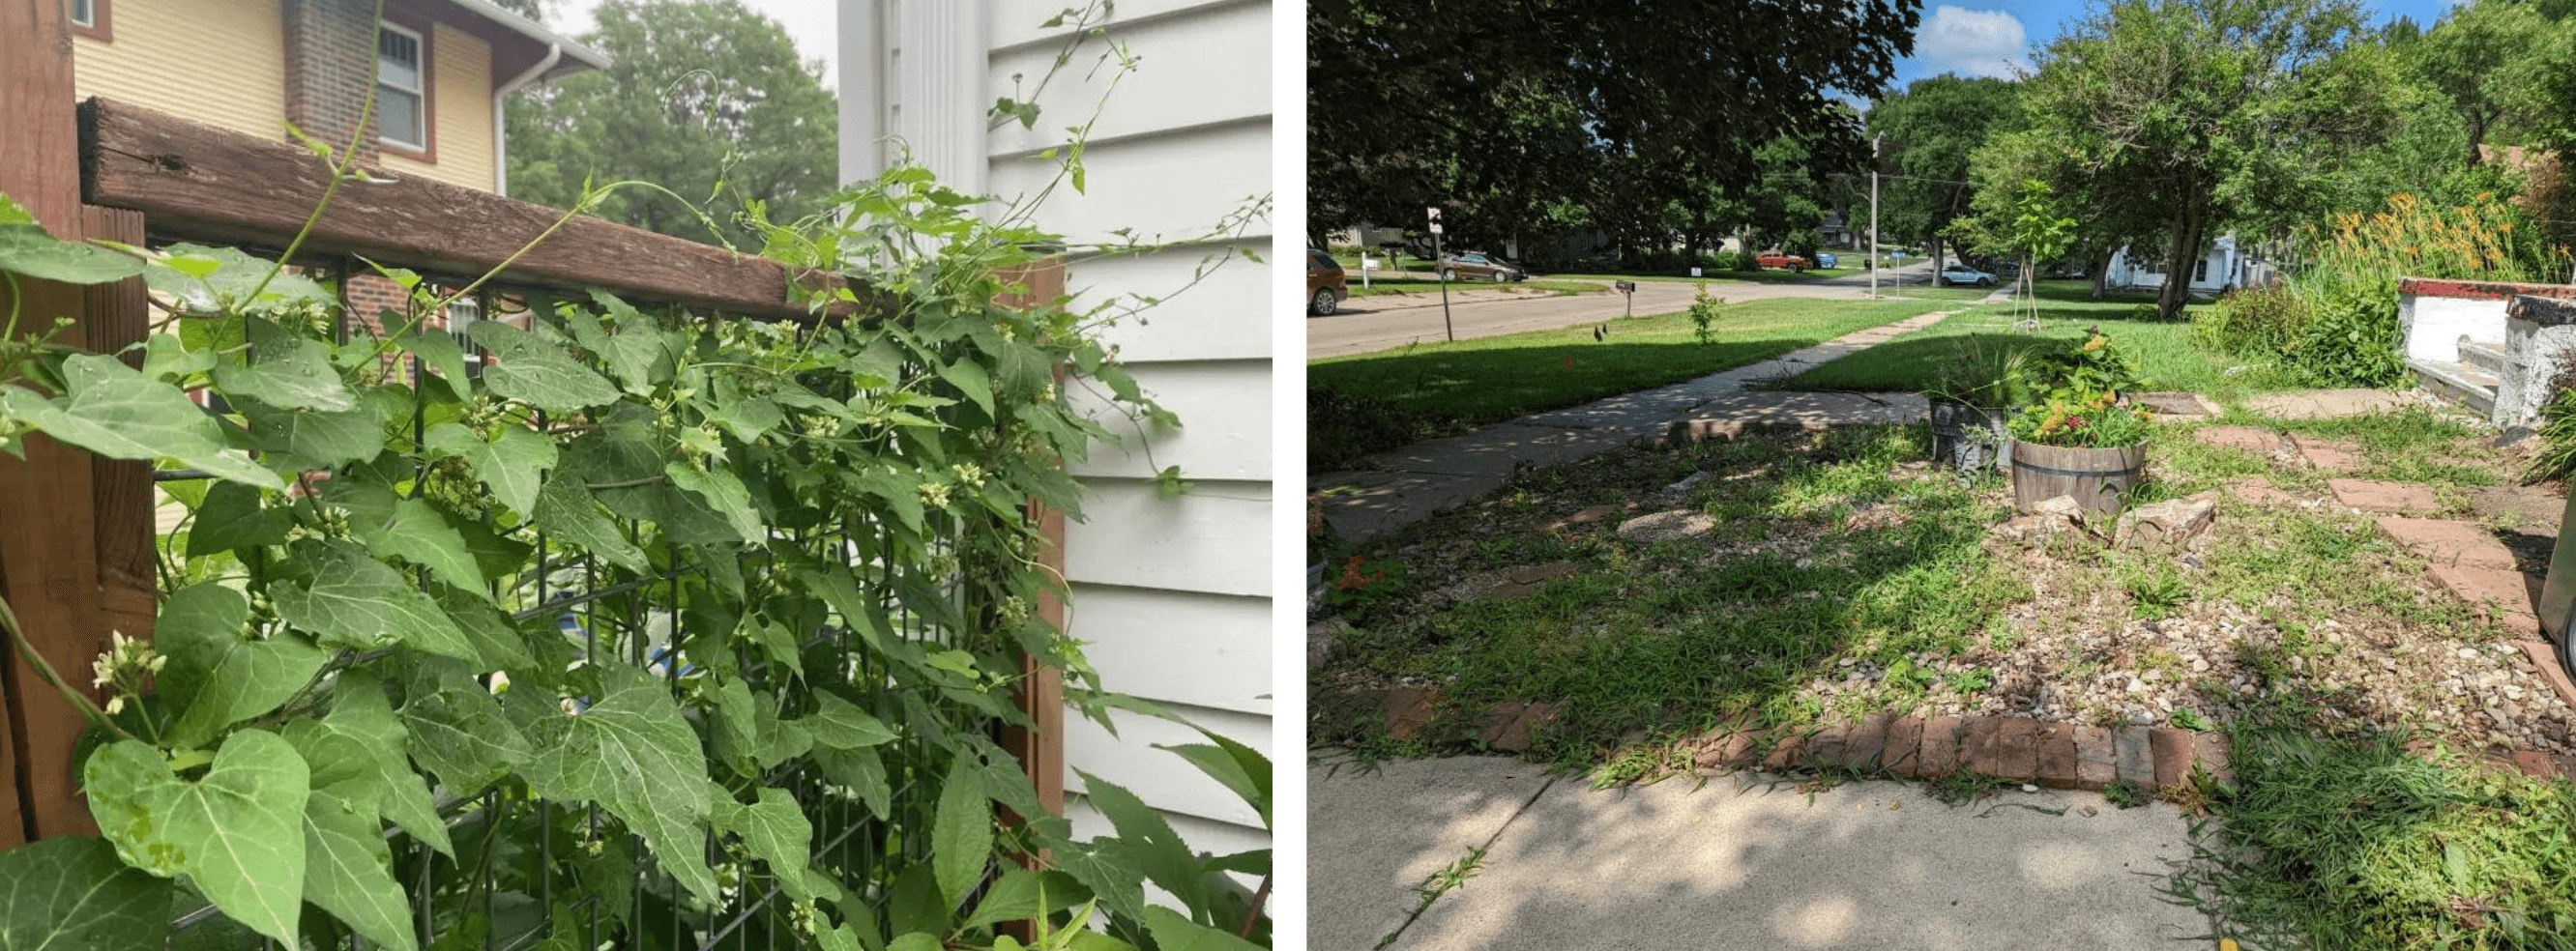 Hanna's milkweed vine growing through a fence and Sarah's bindweed crop in her front yard.